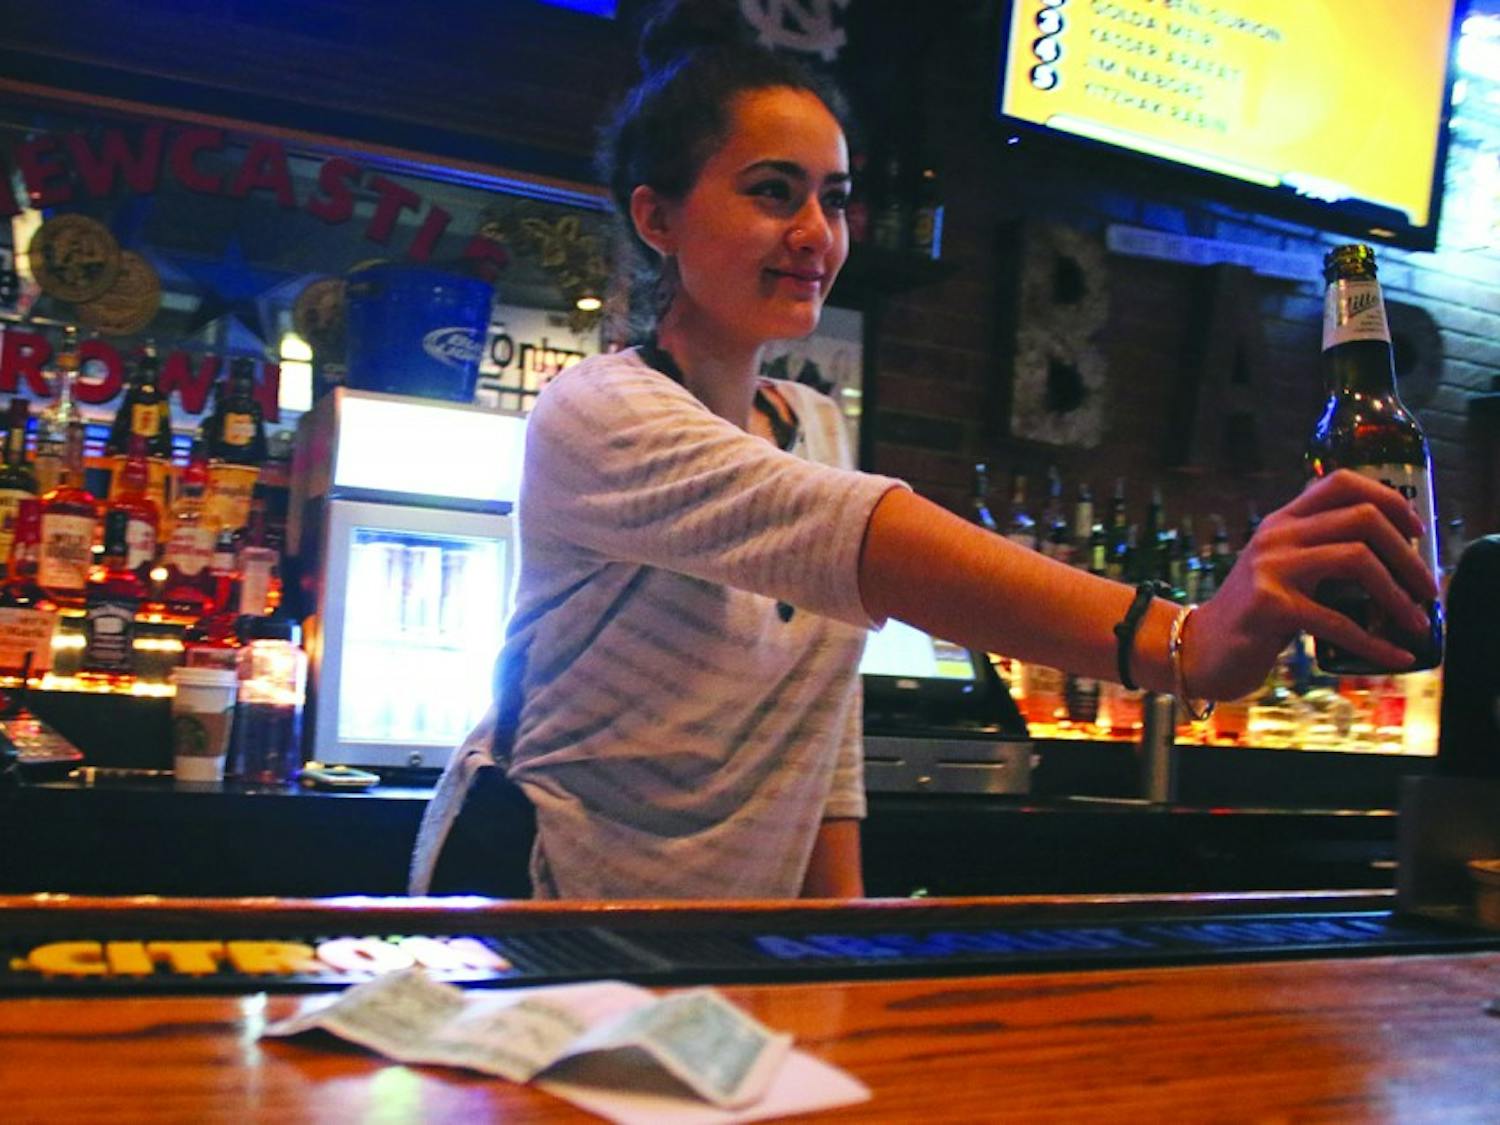 Alex Vasquez works on a tipped wage as a bartender at Four Corners. Recently non-tipped wages have gone up while tipped wages have reined the same.